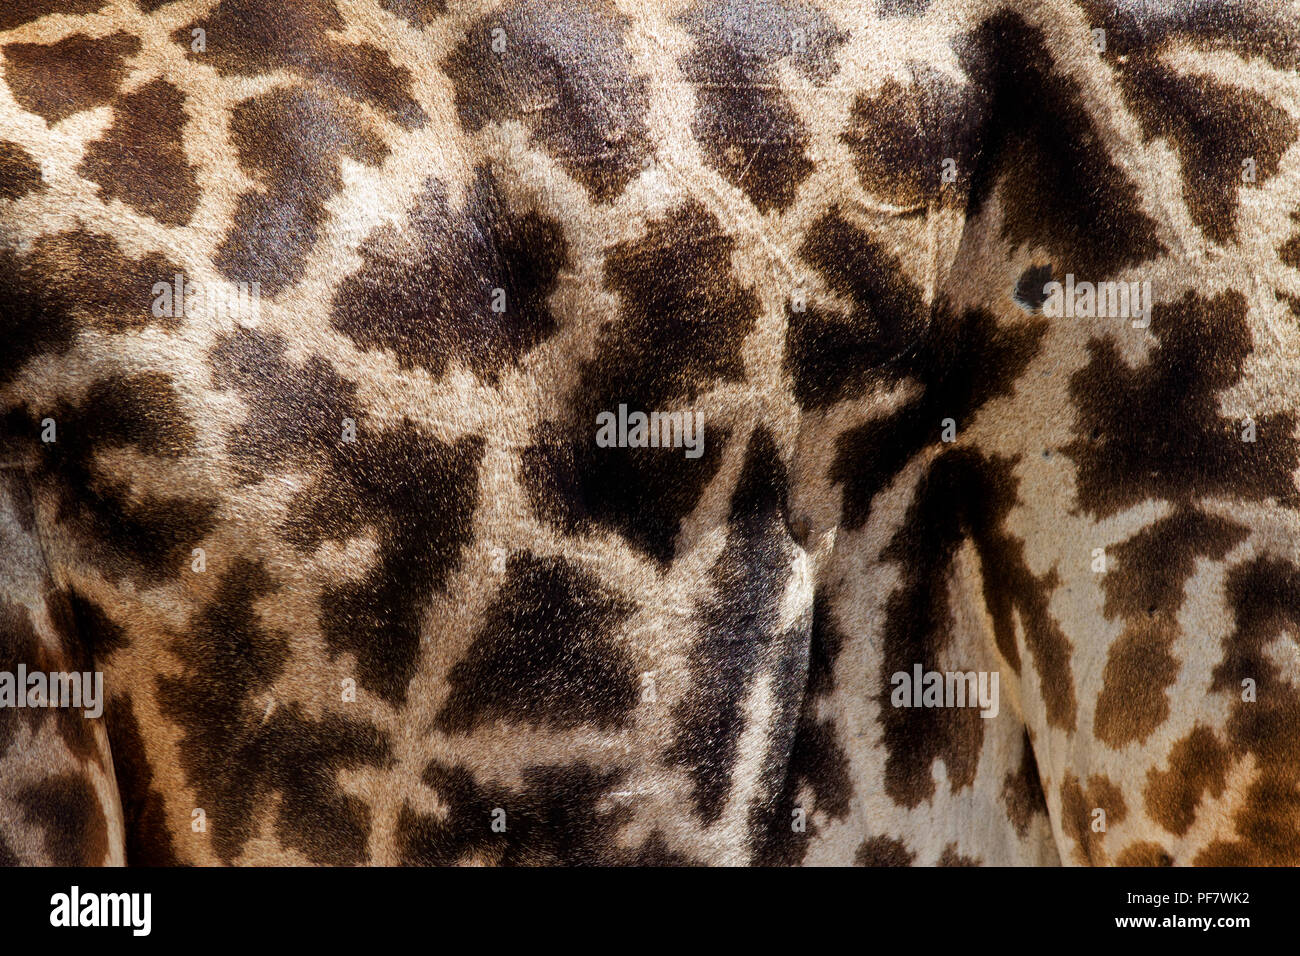 The coat pattern variations of the different sub-species of Giraffe are quite distinct. This is the distinctive pattern of the Masai Giraffe of Tanzan Stock Photo